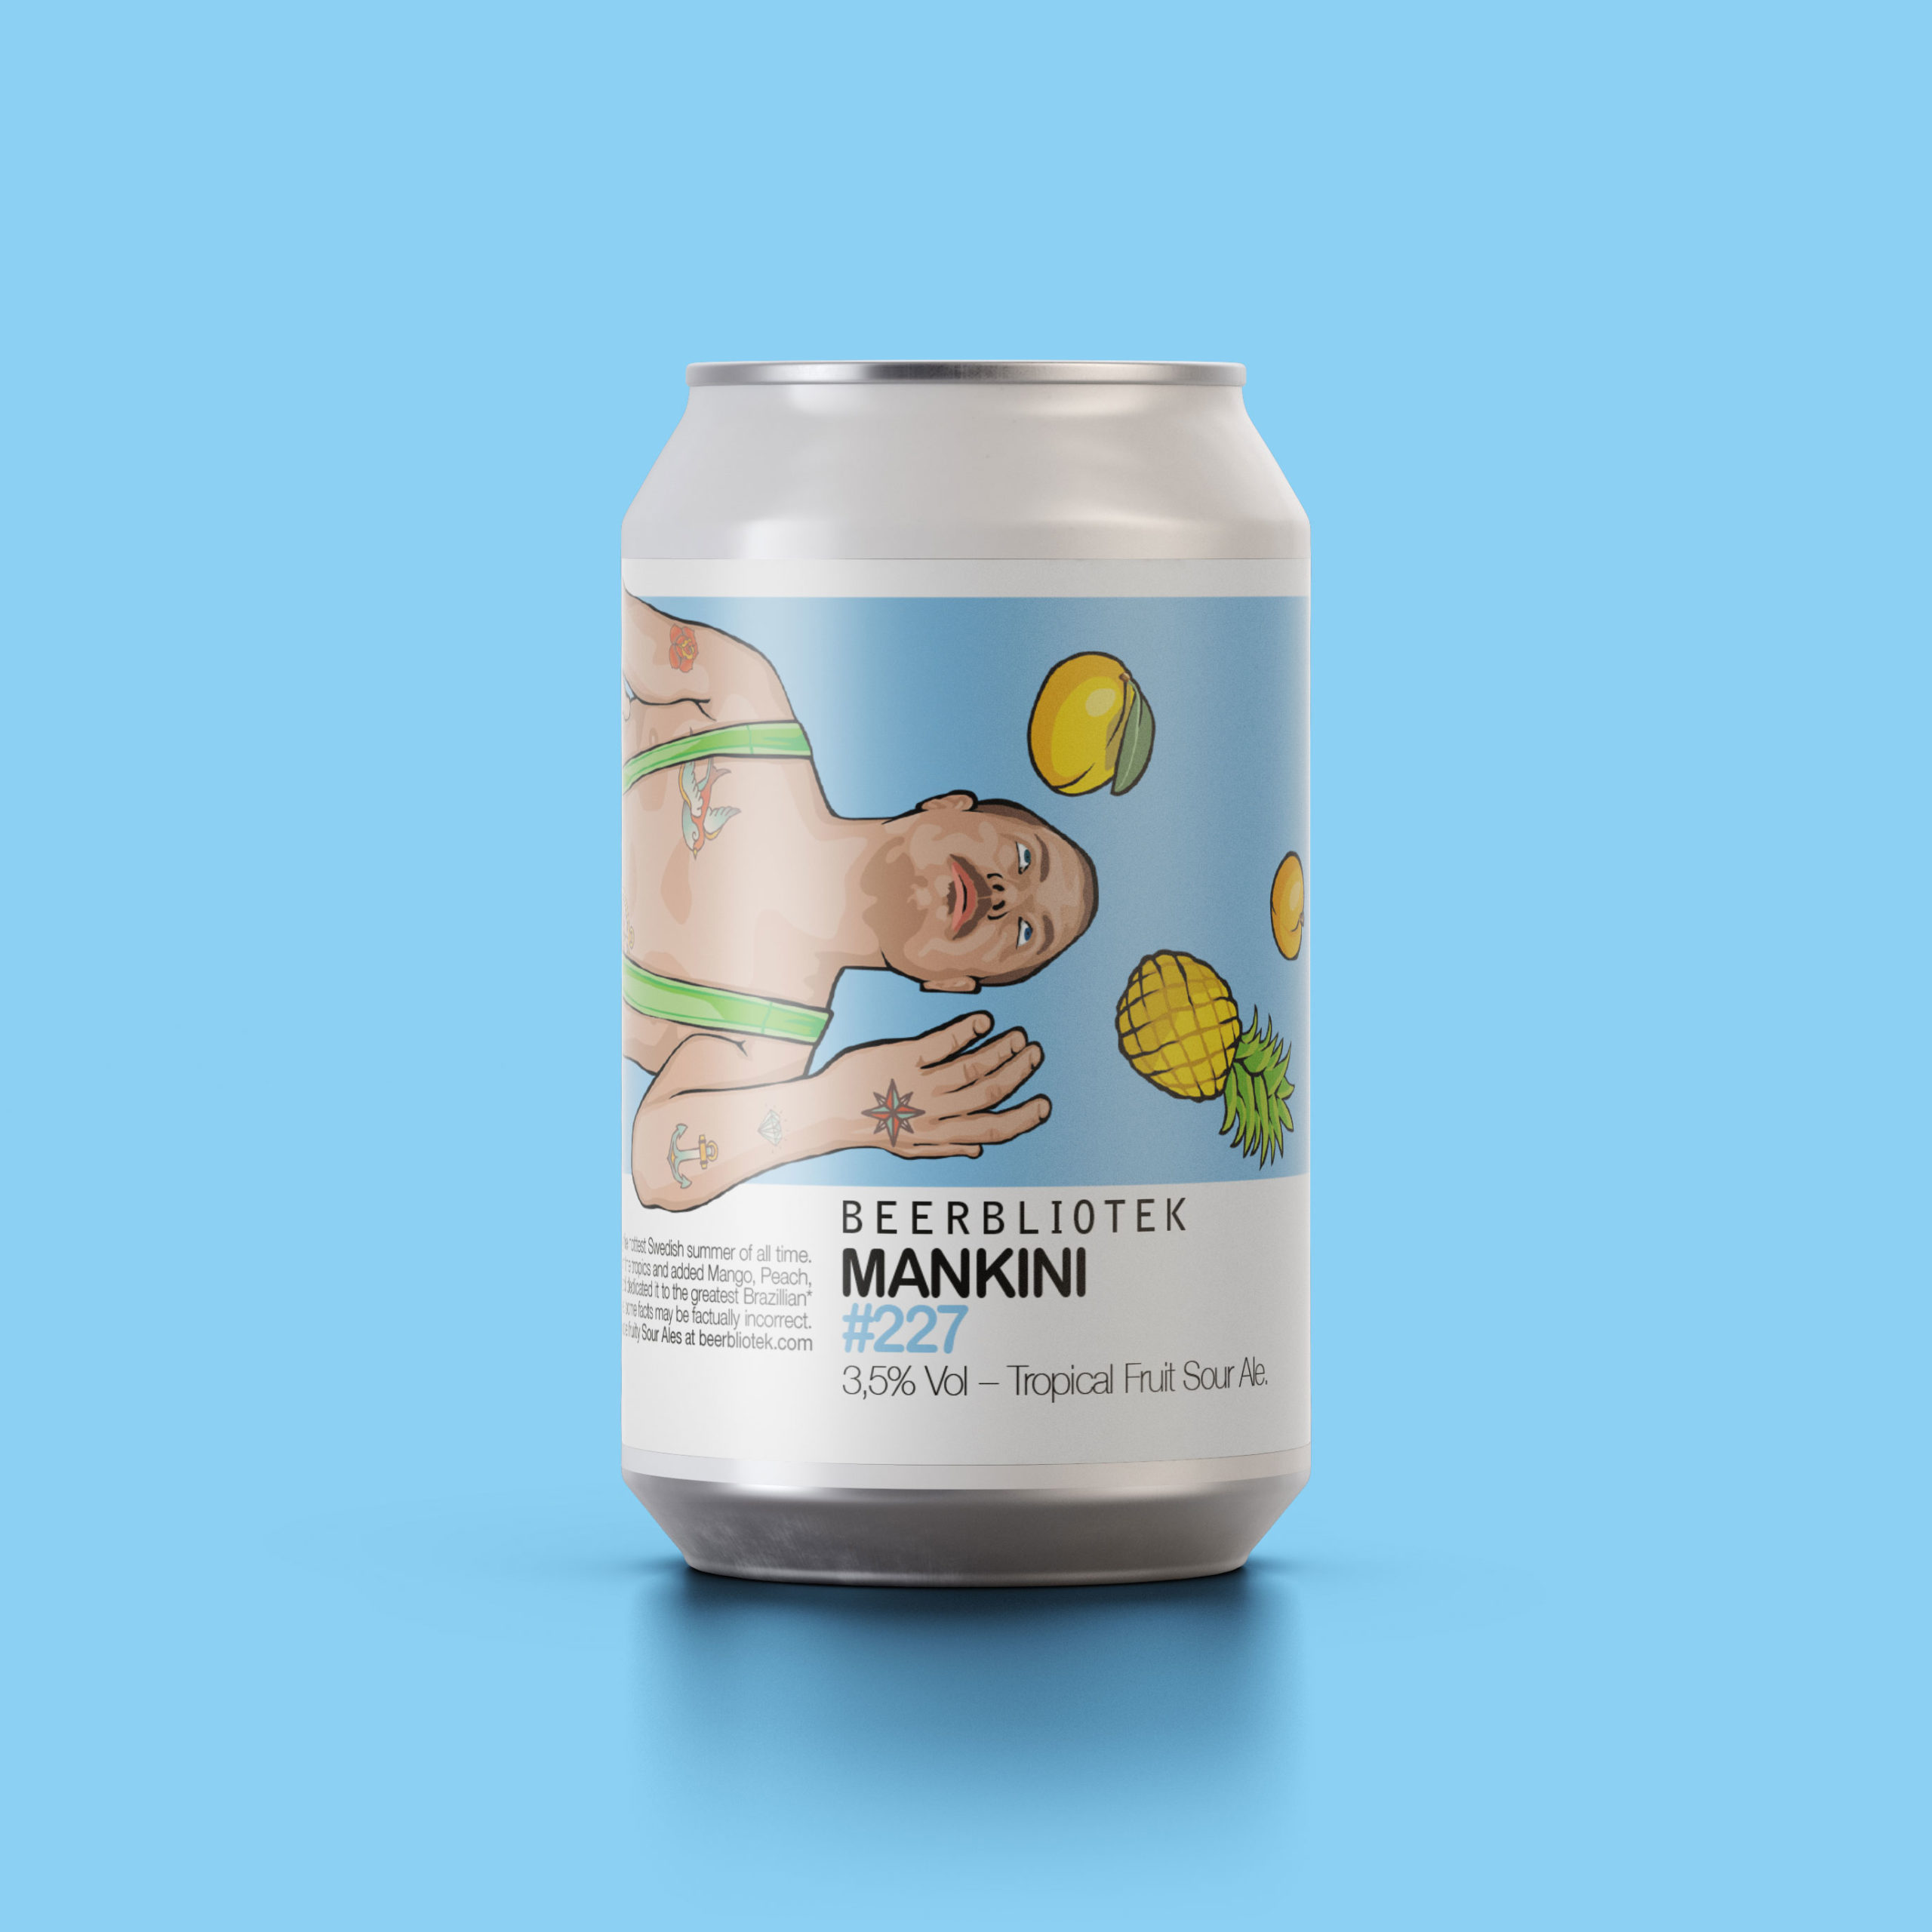 A can packshot of Mankini Tropical Fruit Sour Ale, brewed by Swedish Craft Brewery Beerbliotek.